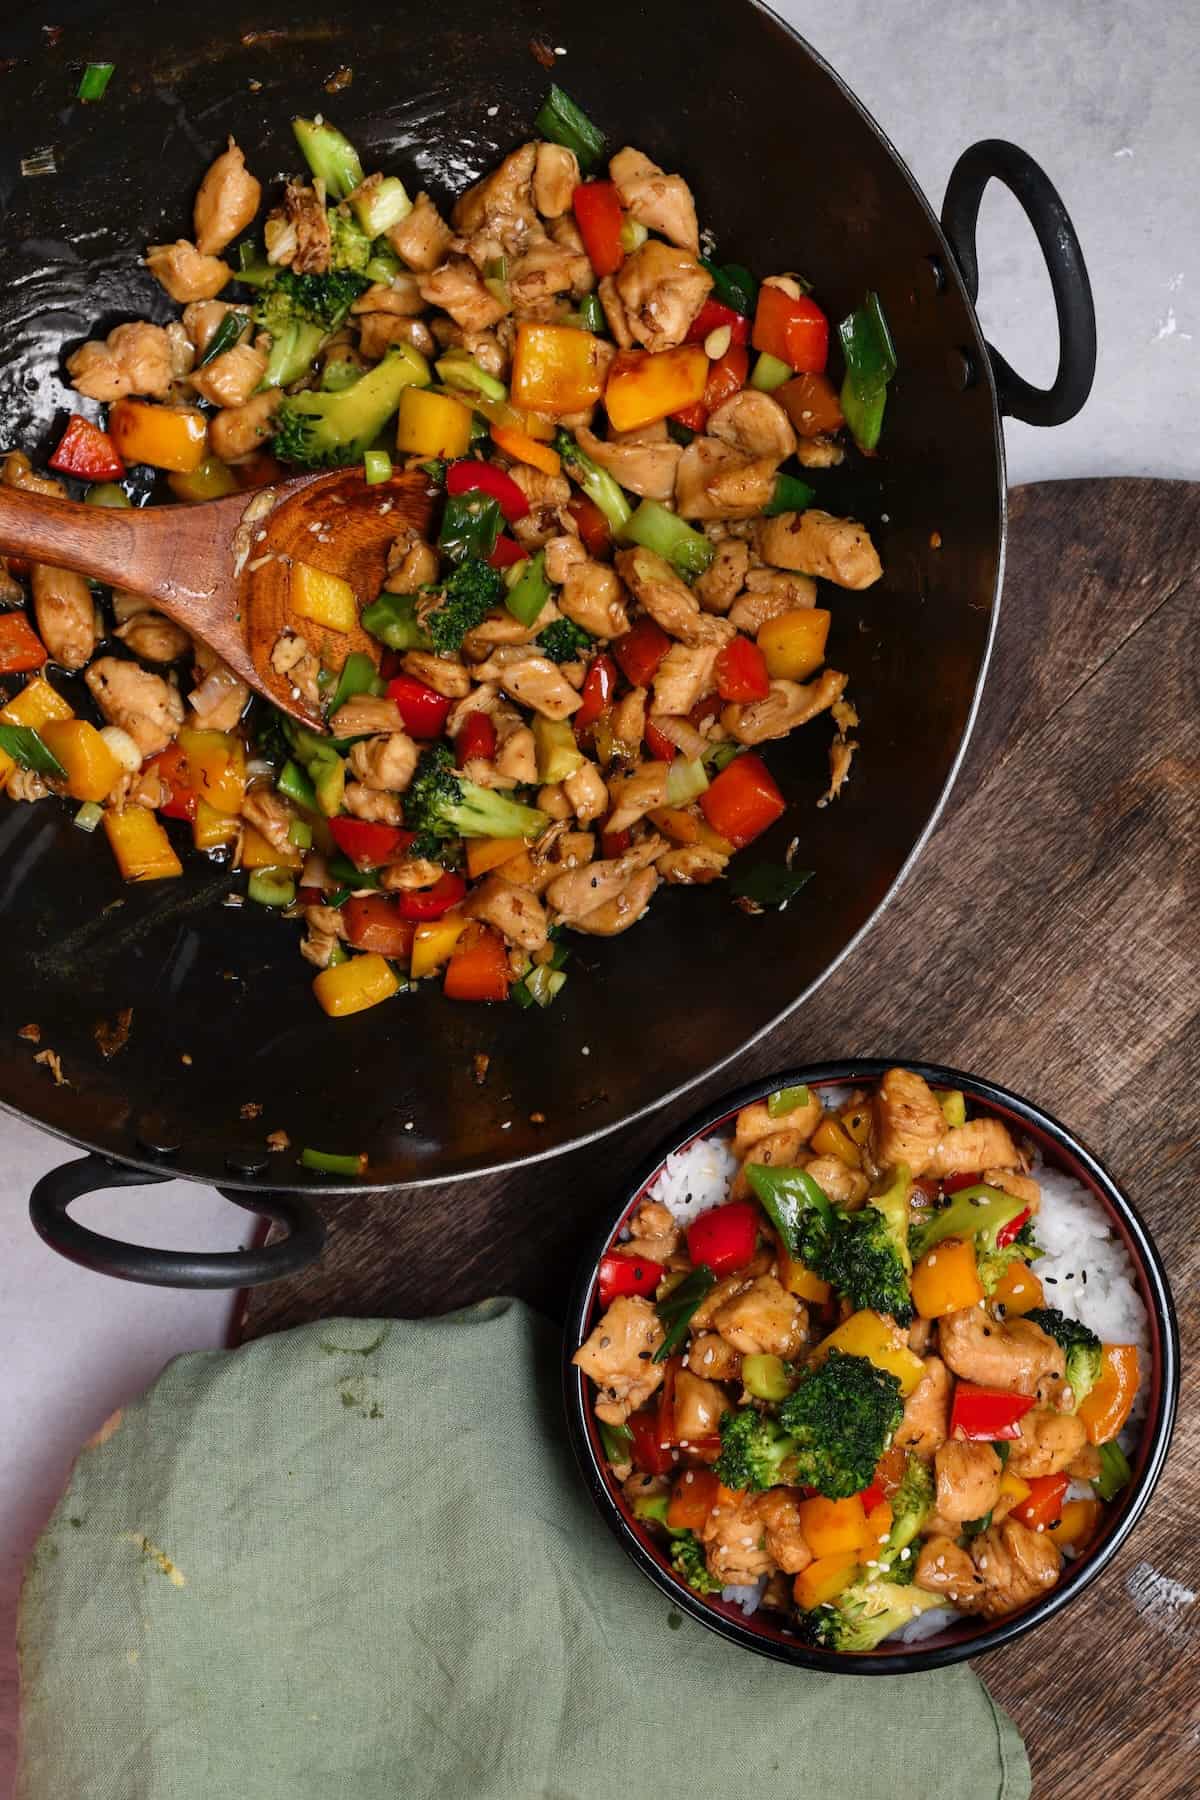 Stir fried chicken in a wok and a serving of it